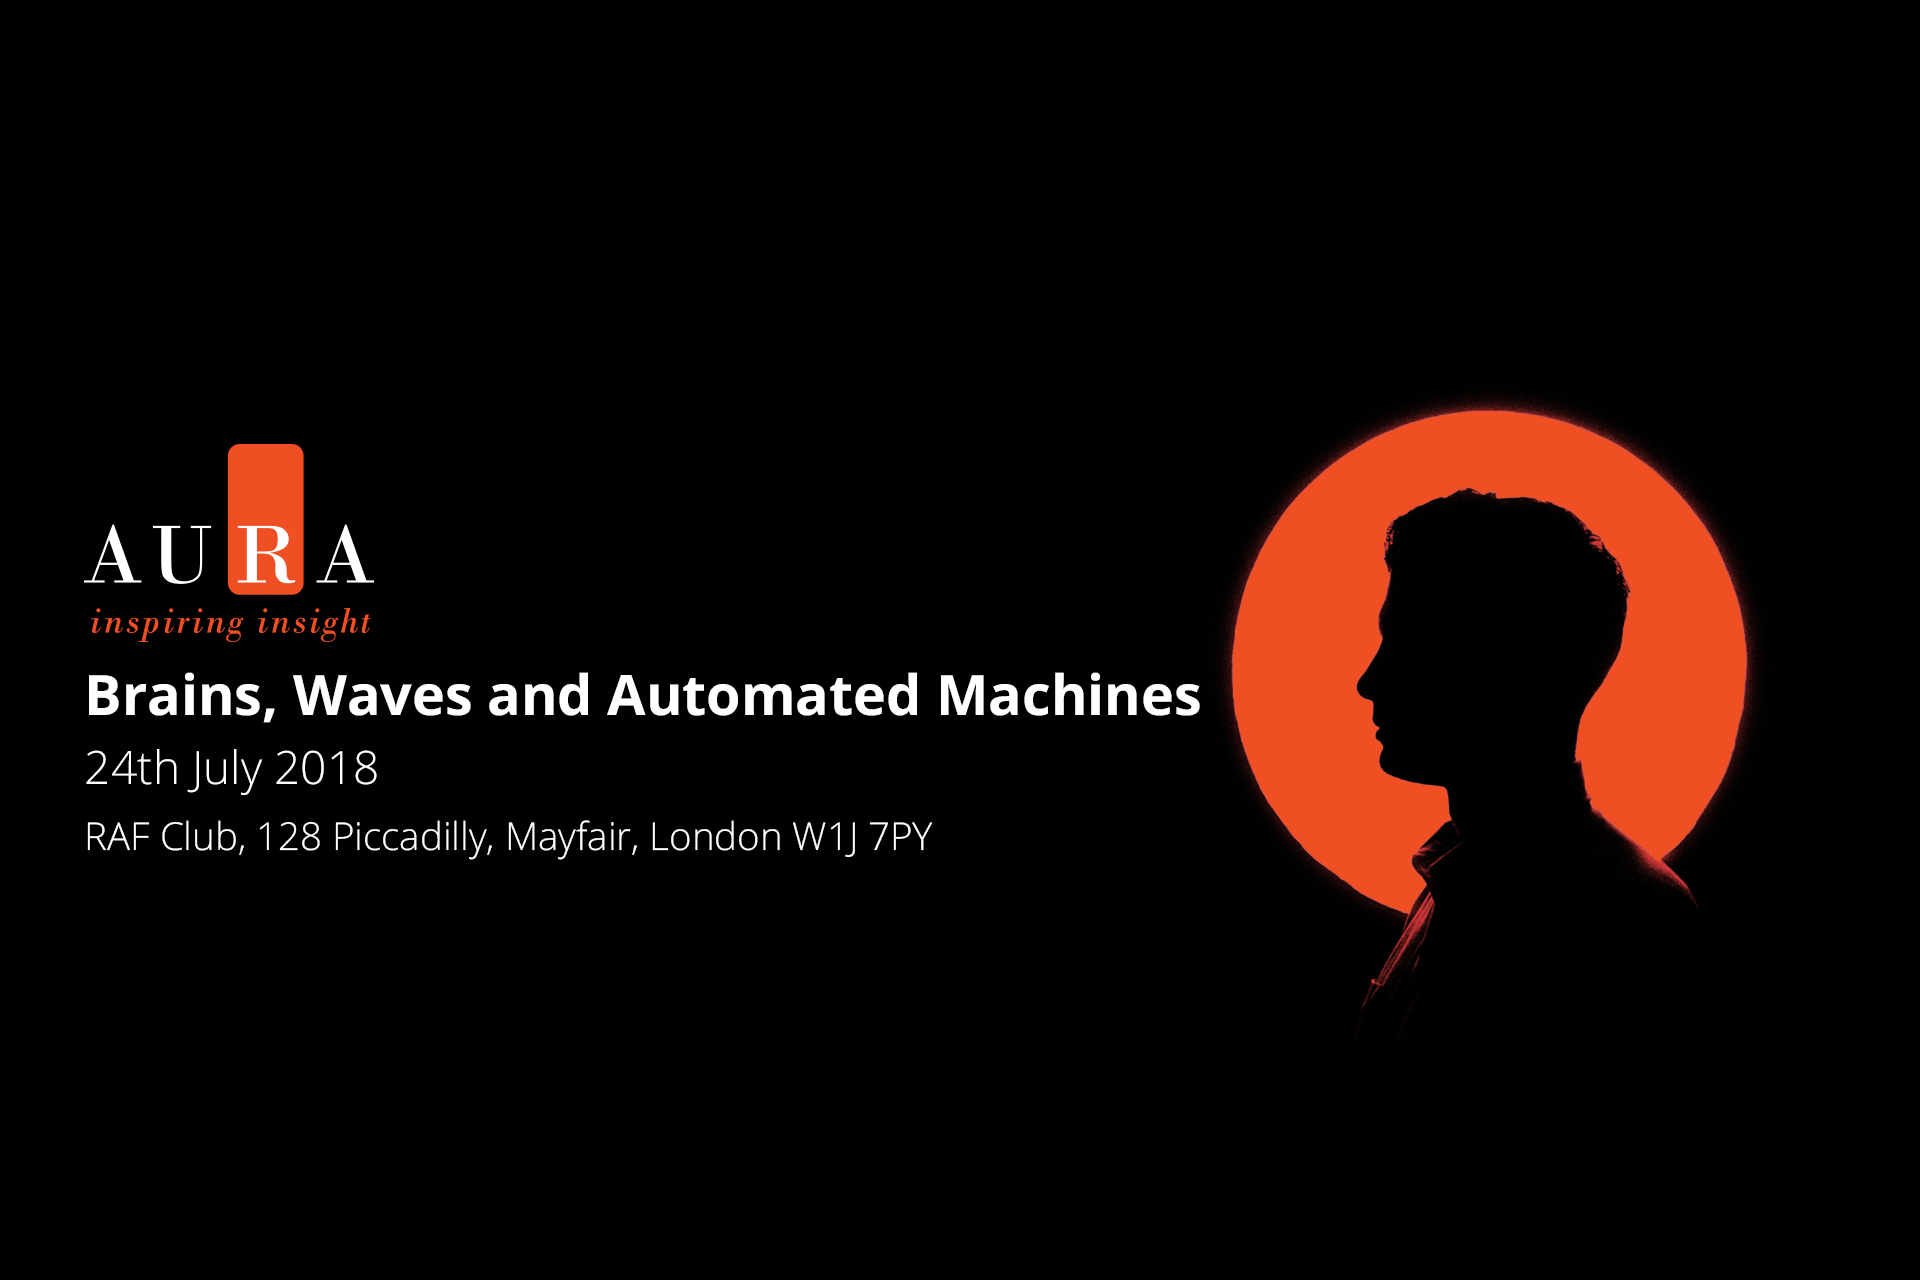 Brains, Waves and Automated Machines